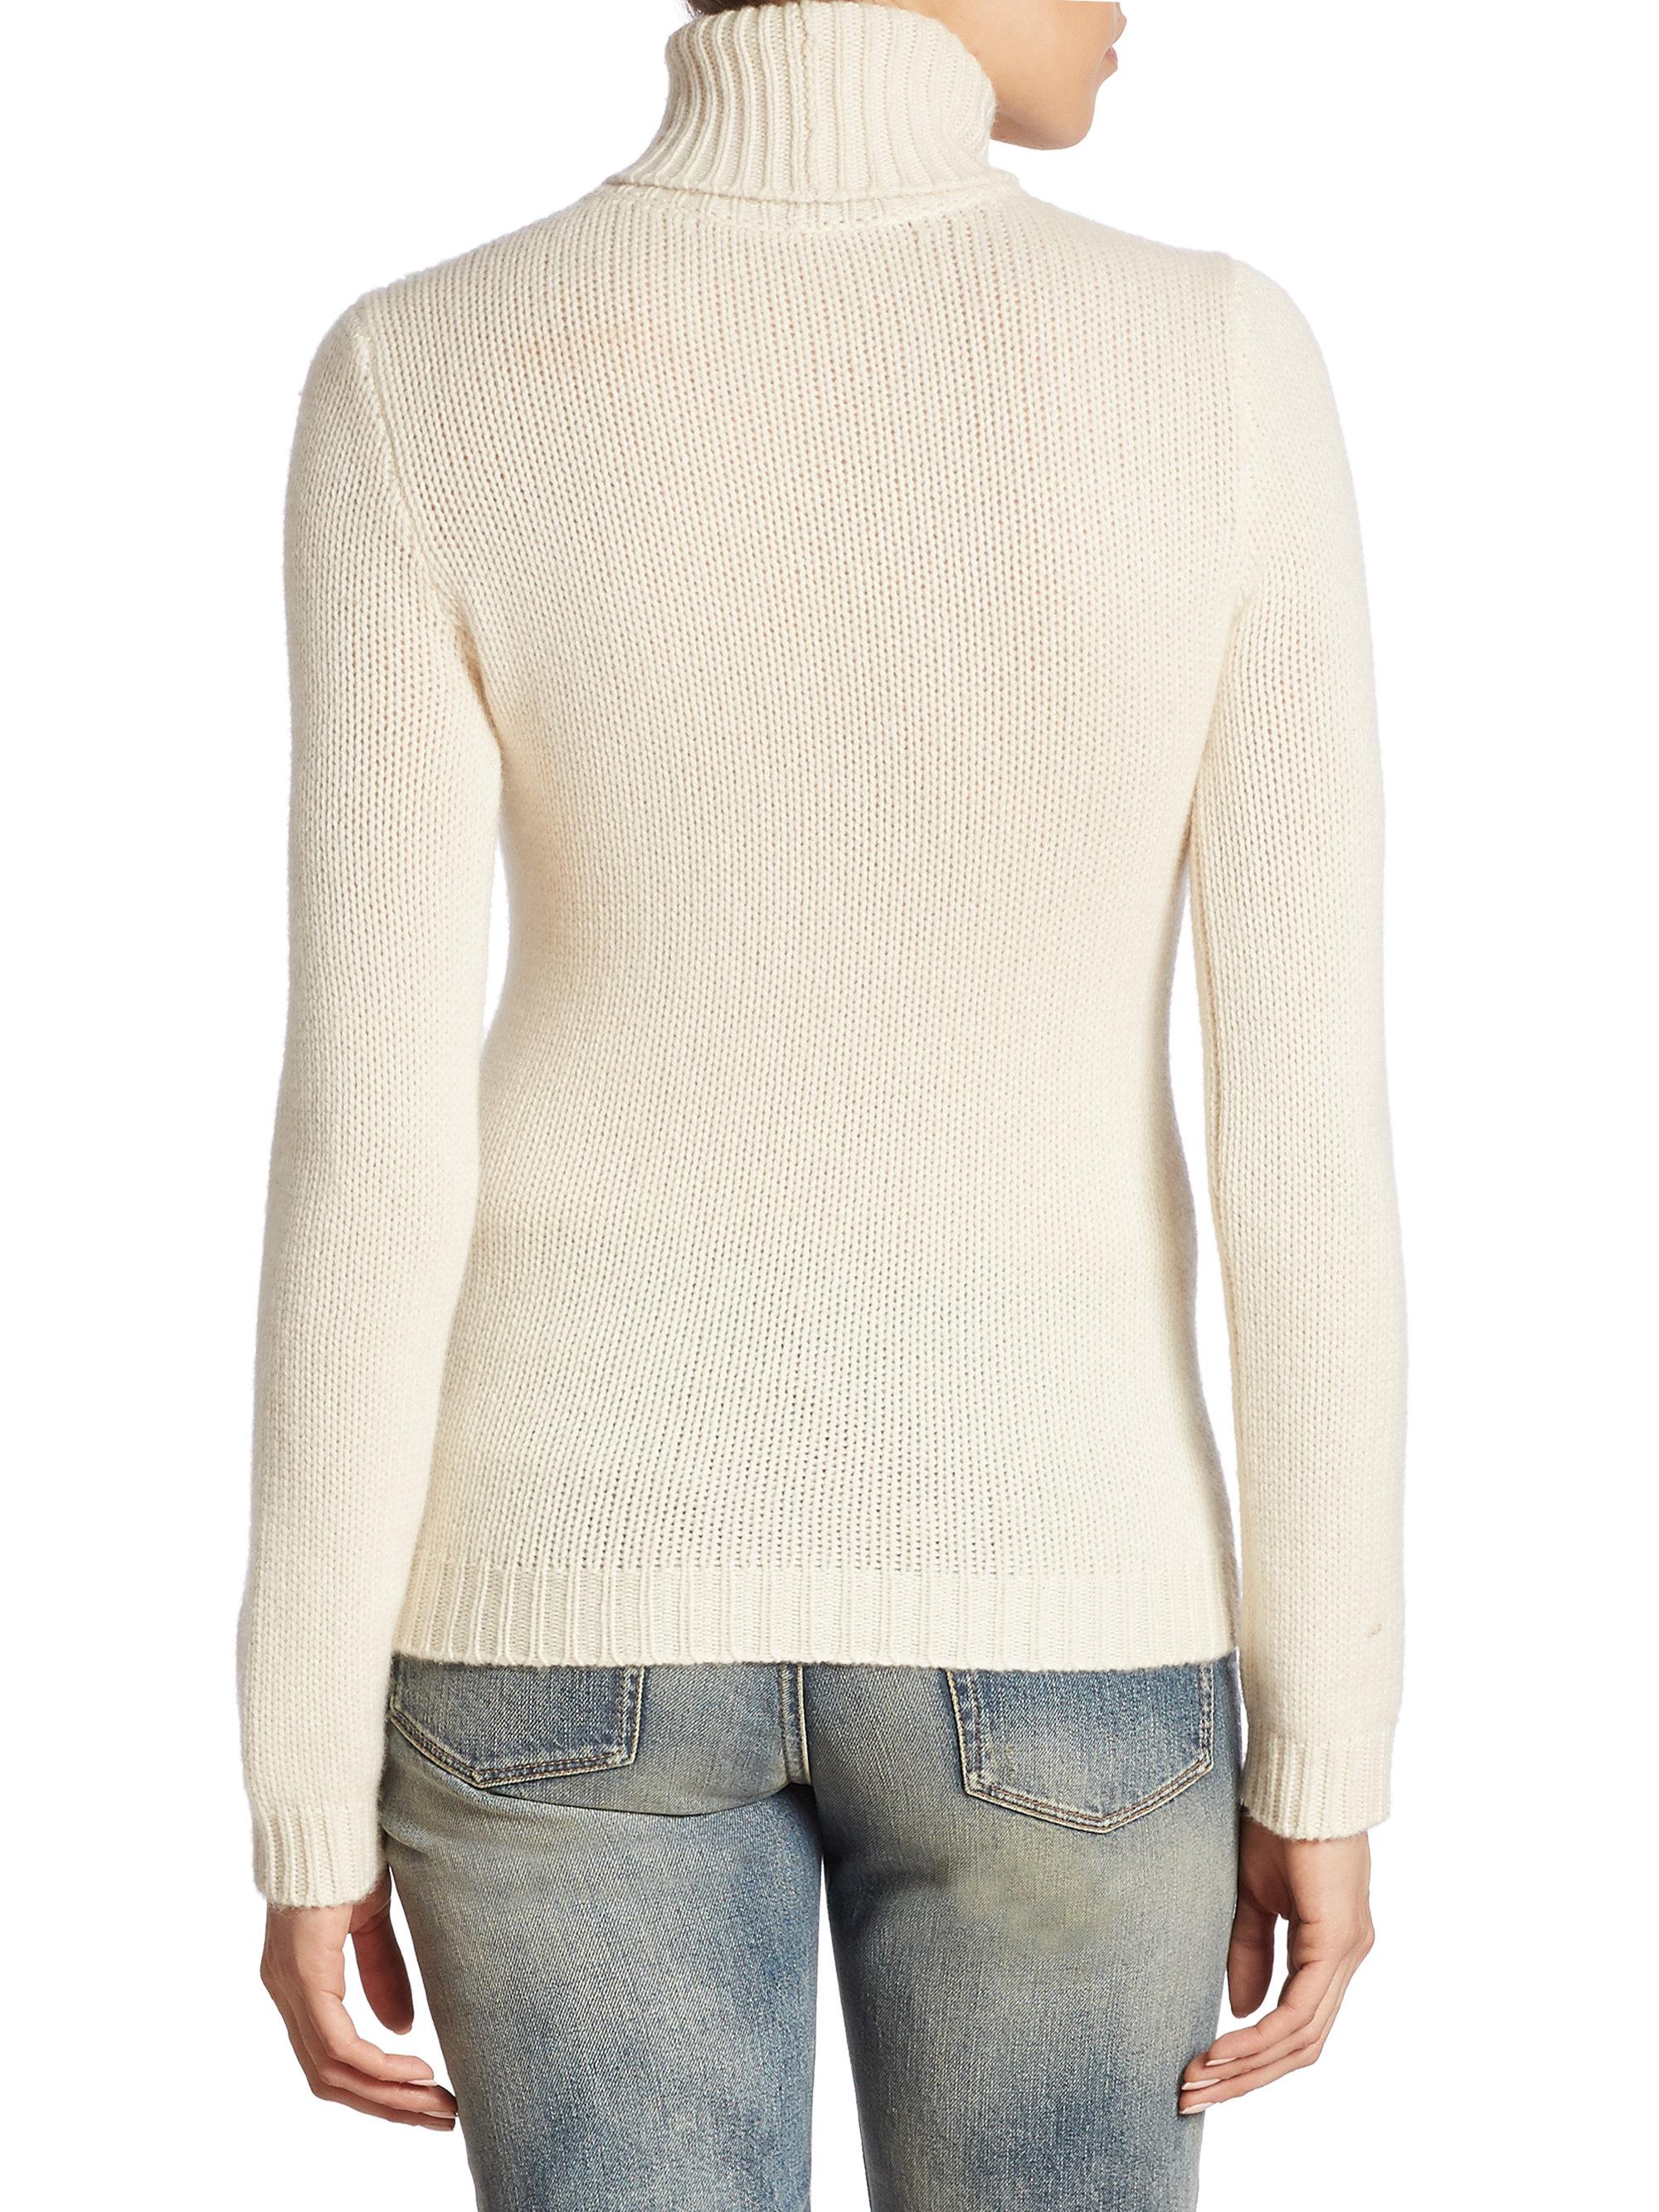 Ralph Lauren Collection Iconic Flag Cashmere Turtleneck Sweater in ...